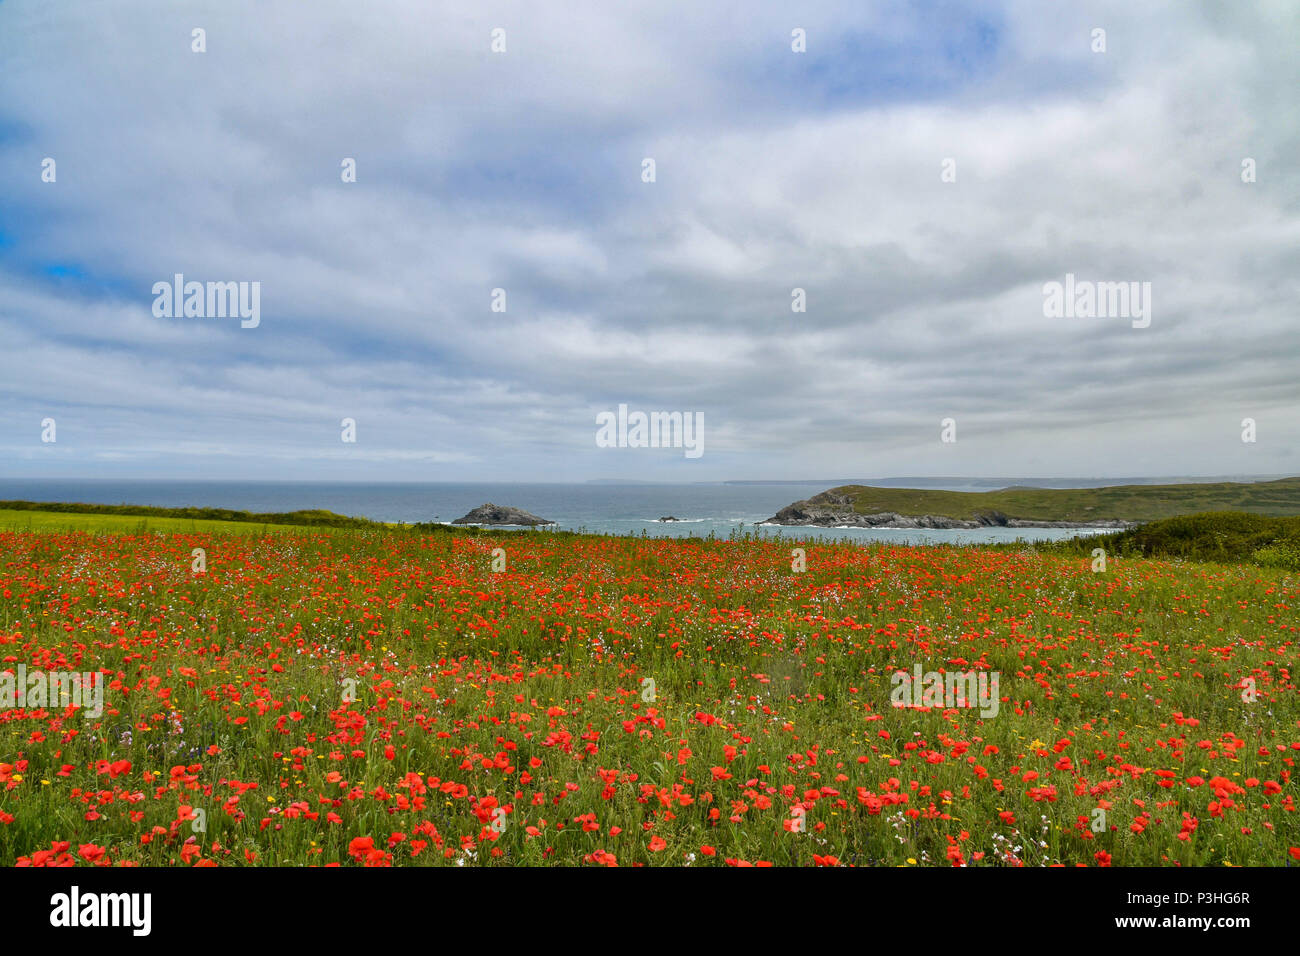 Crantock, Cornwall, UK. 19th June 2018. UK Weather. A warm, if cloudy day in North Cornwall. Seen here the West Pentire Arable Fields project. This area is managed specifically as a nature reserve. At this time of the year the fields are full of poppies and cornflowers. In the air is the constant sound of Skylarks. The scheme is managed by Natural England, their farm tenants and the national trust. Credit: Simon Maycock/Alamy Live News Stock Photo